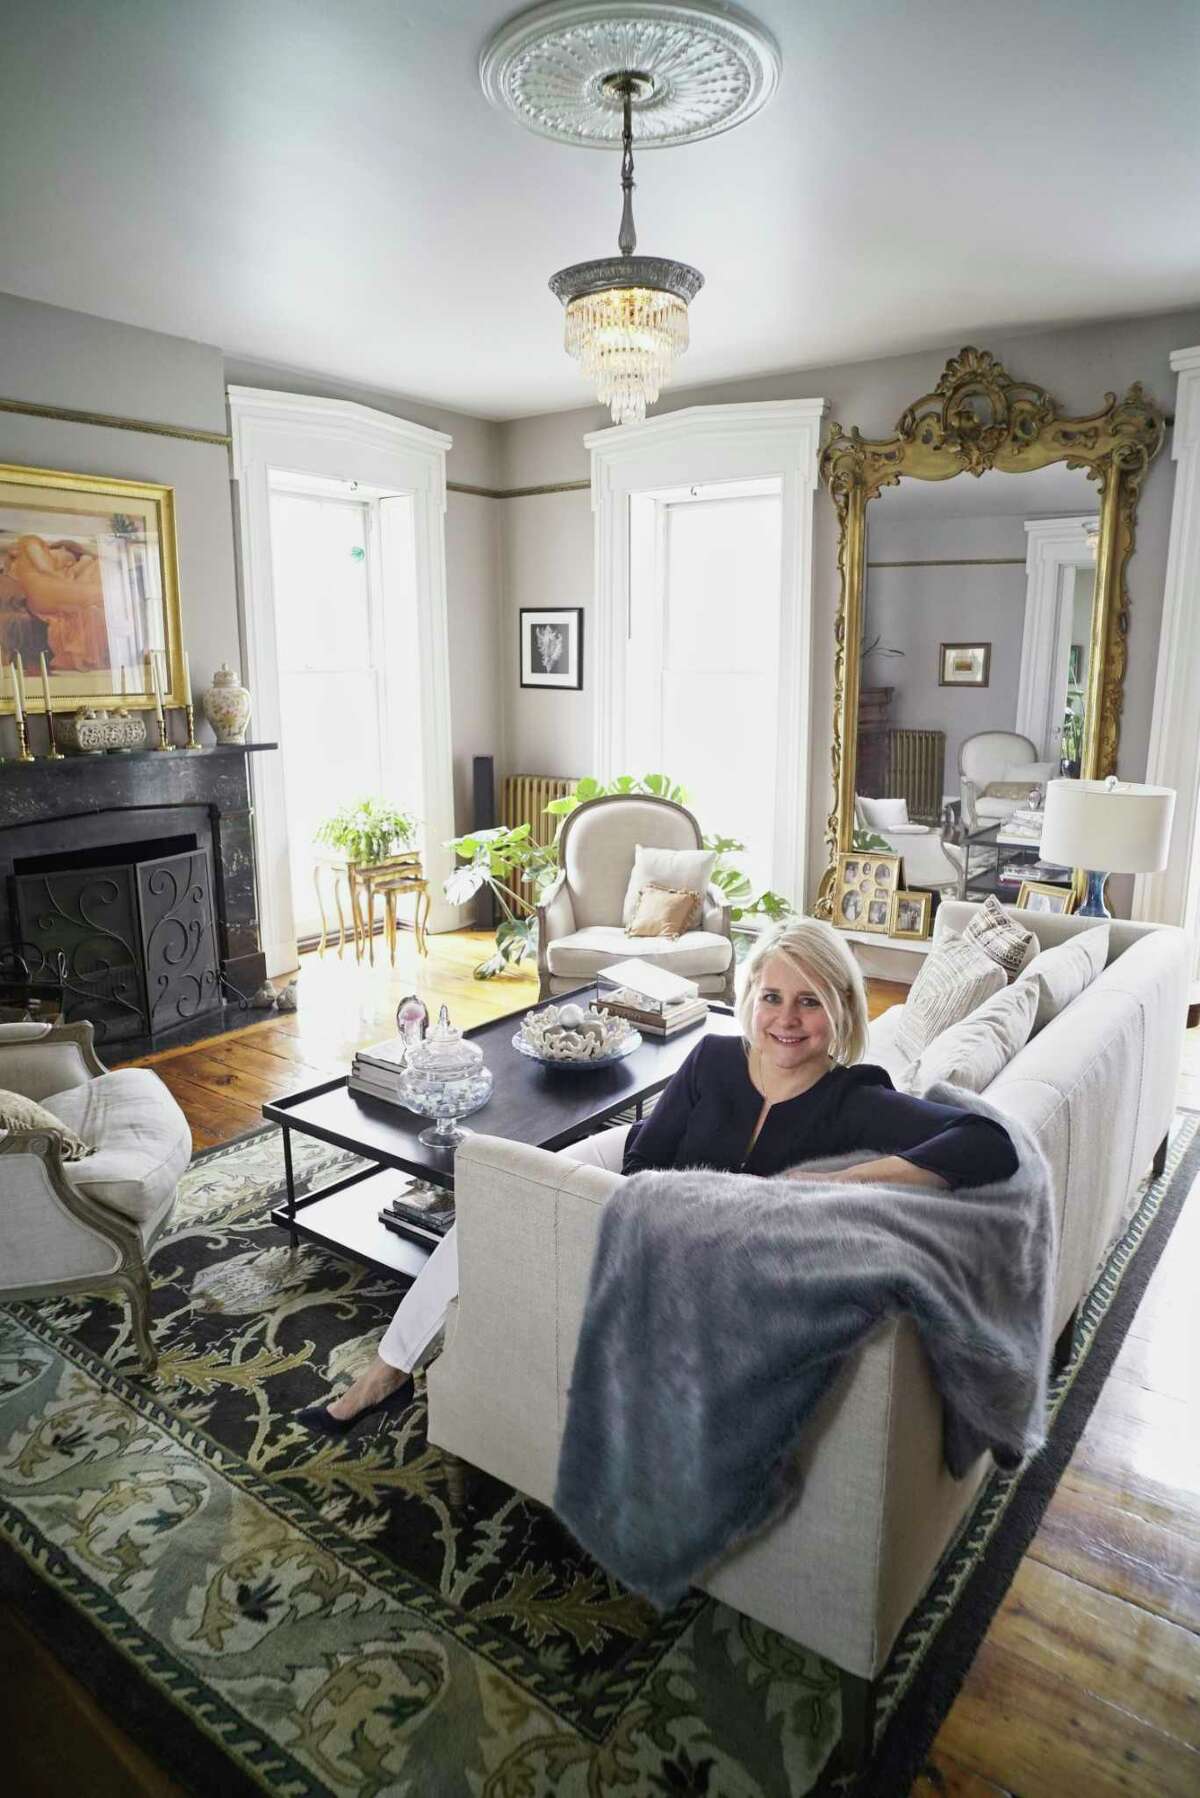 Stephanie Pettit poses for a photo in the living room at her home on Tuesday, March 12, 2019, in Troy, N.Y. (Paul Buckowski/Times Union)